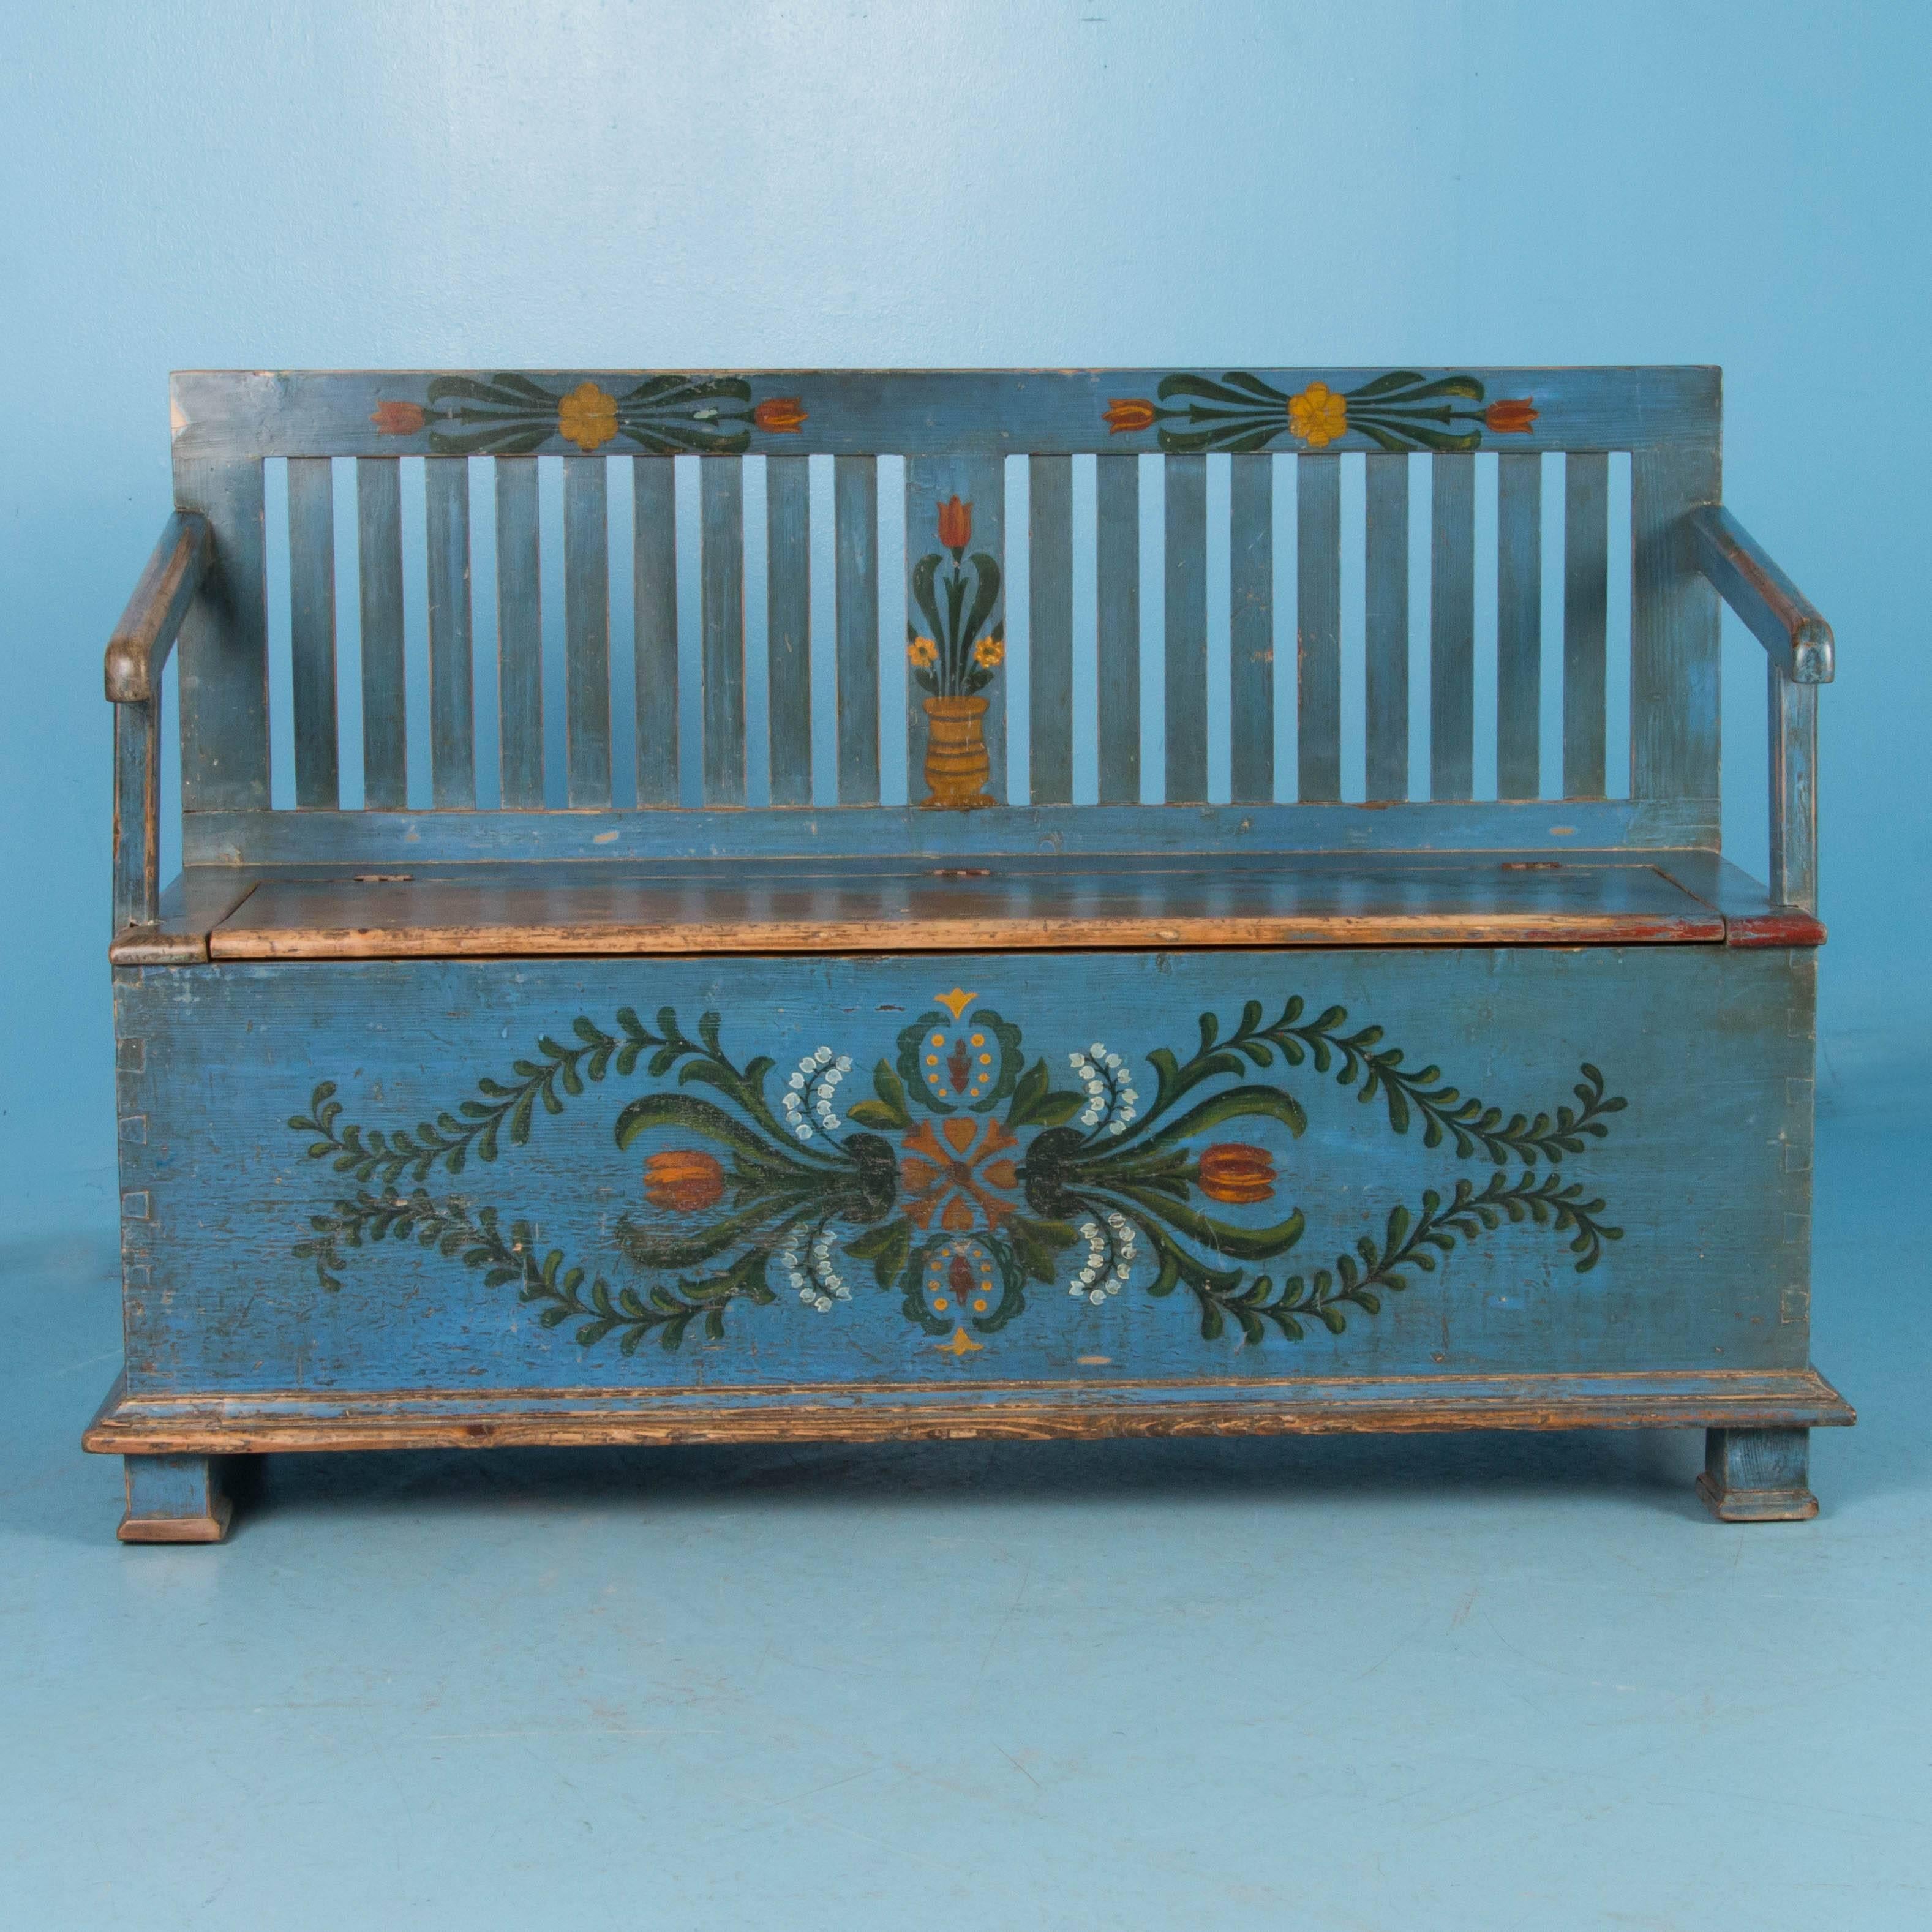 This delightful cottage style storage bench still maintains its original paint, with a traditional green, yellow and red floral and vine design on a light blue background. It is a perfect size for an entry at just under 5 feet long, and still has